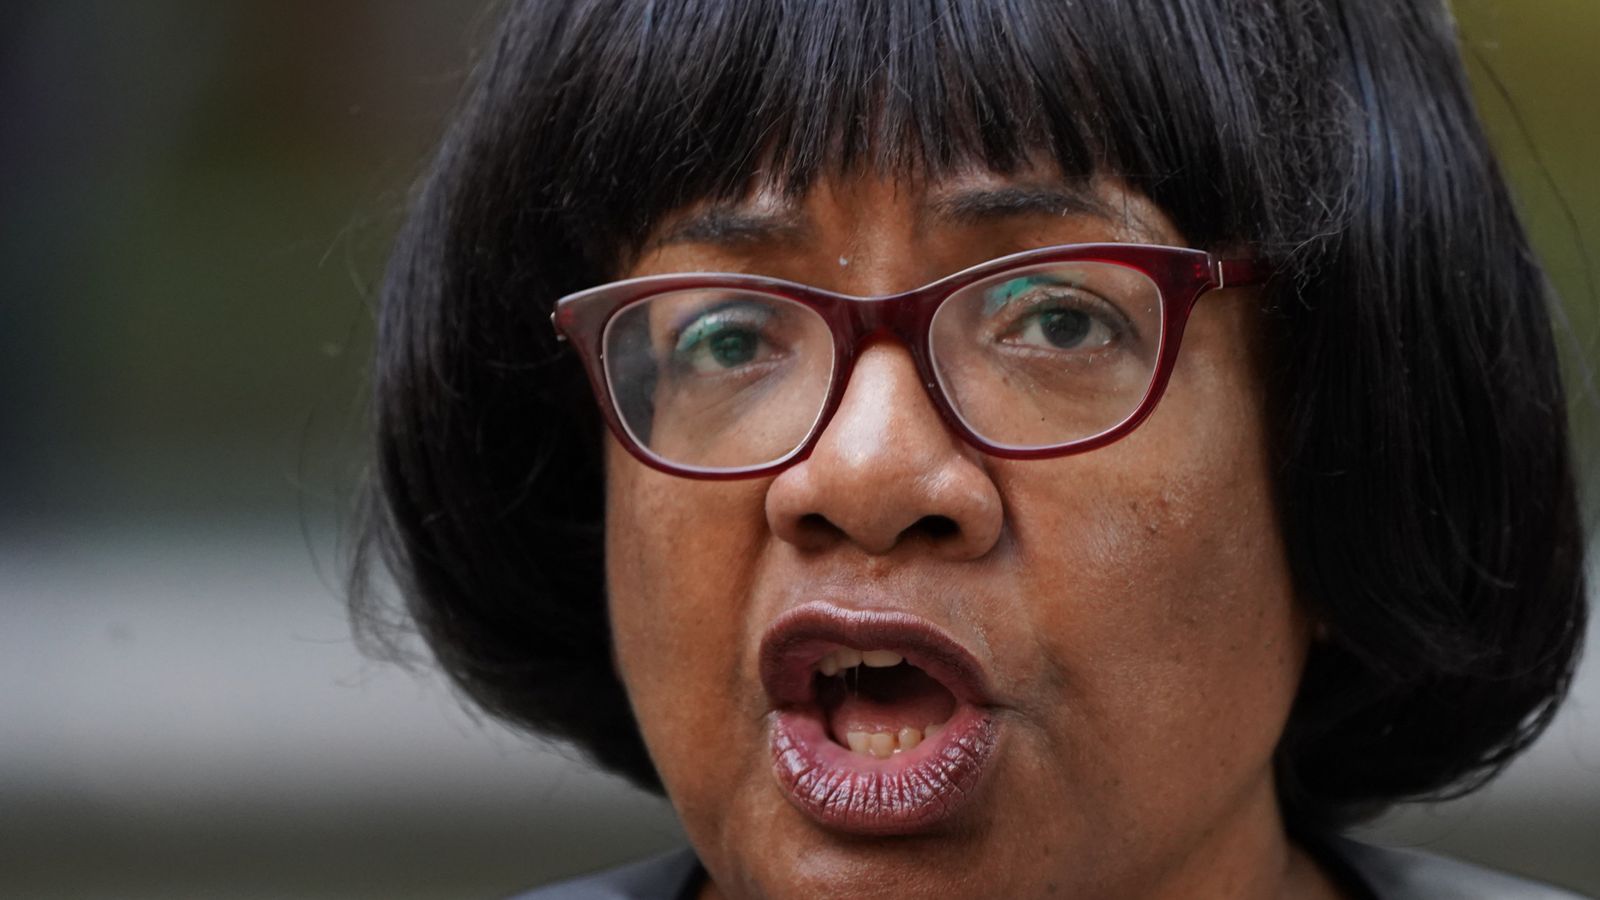 Diane Abbott hits out at 'level of racism still in Britain' as MP is cheered by supporters at rally